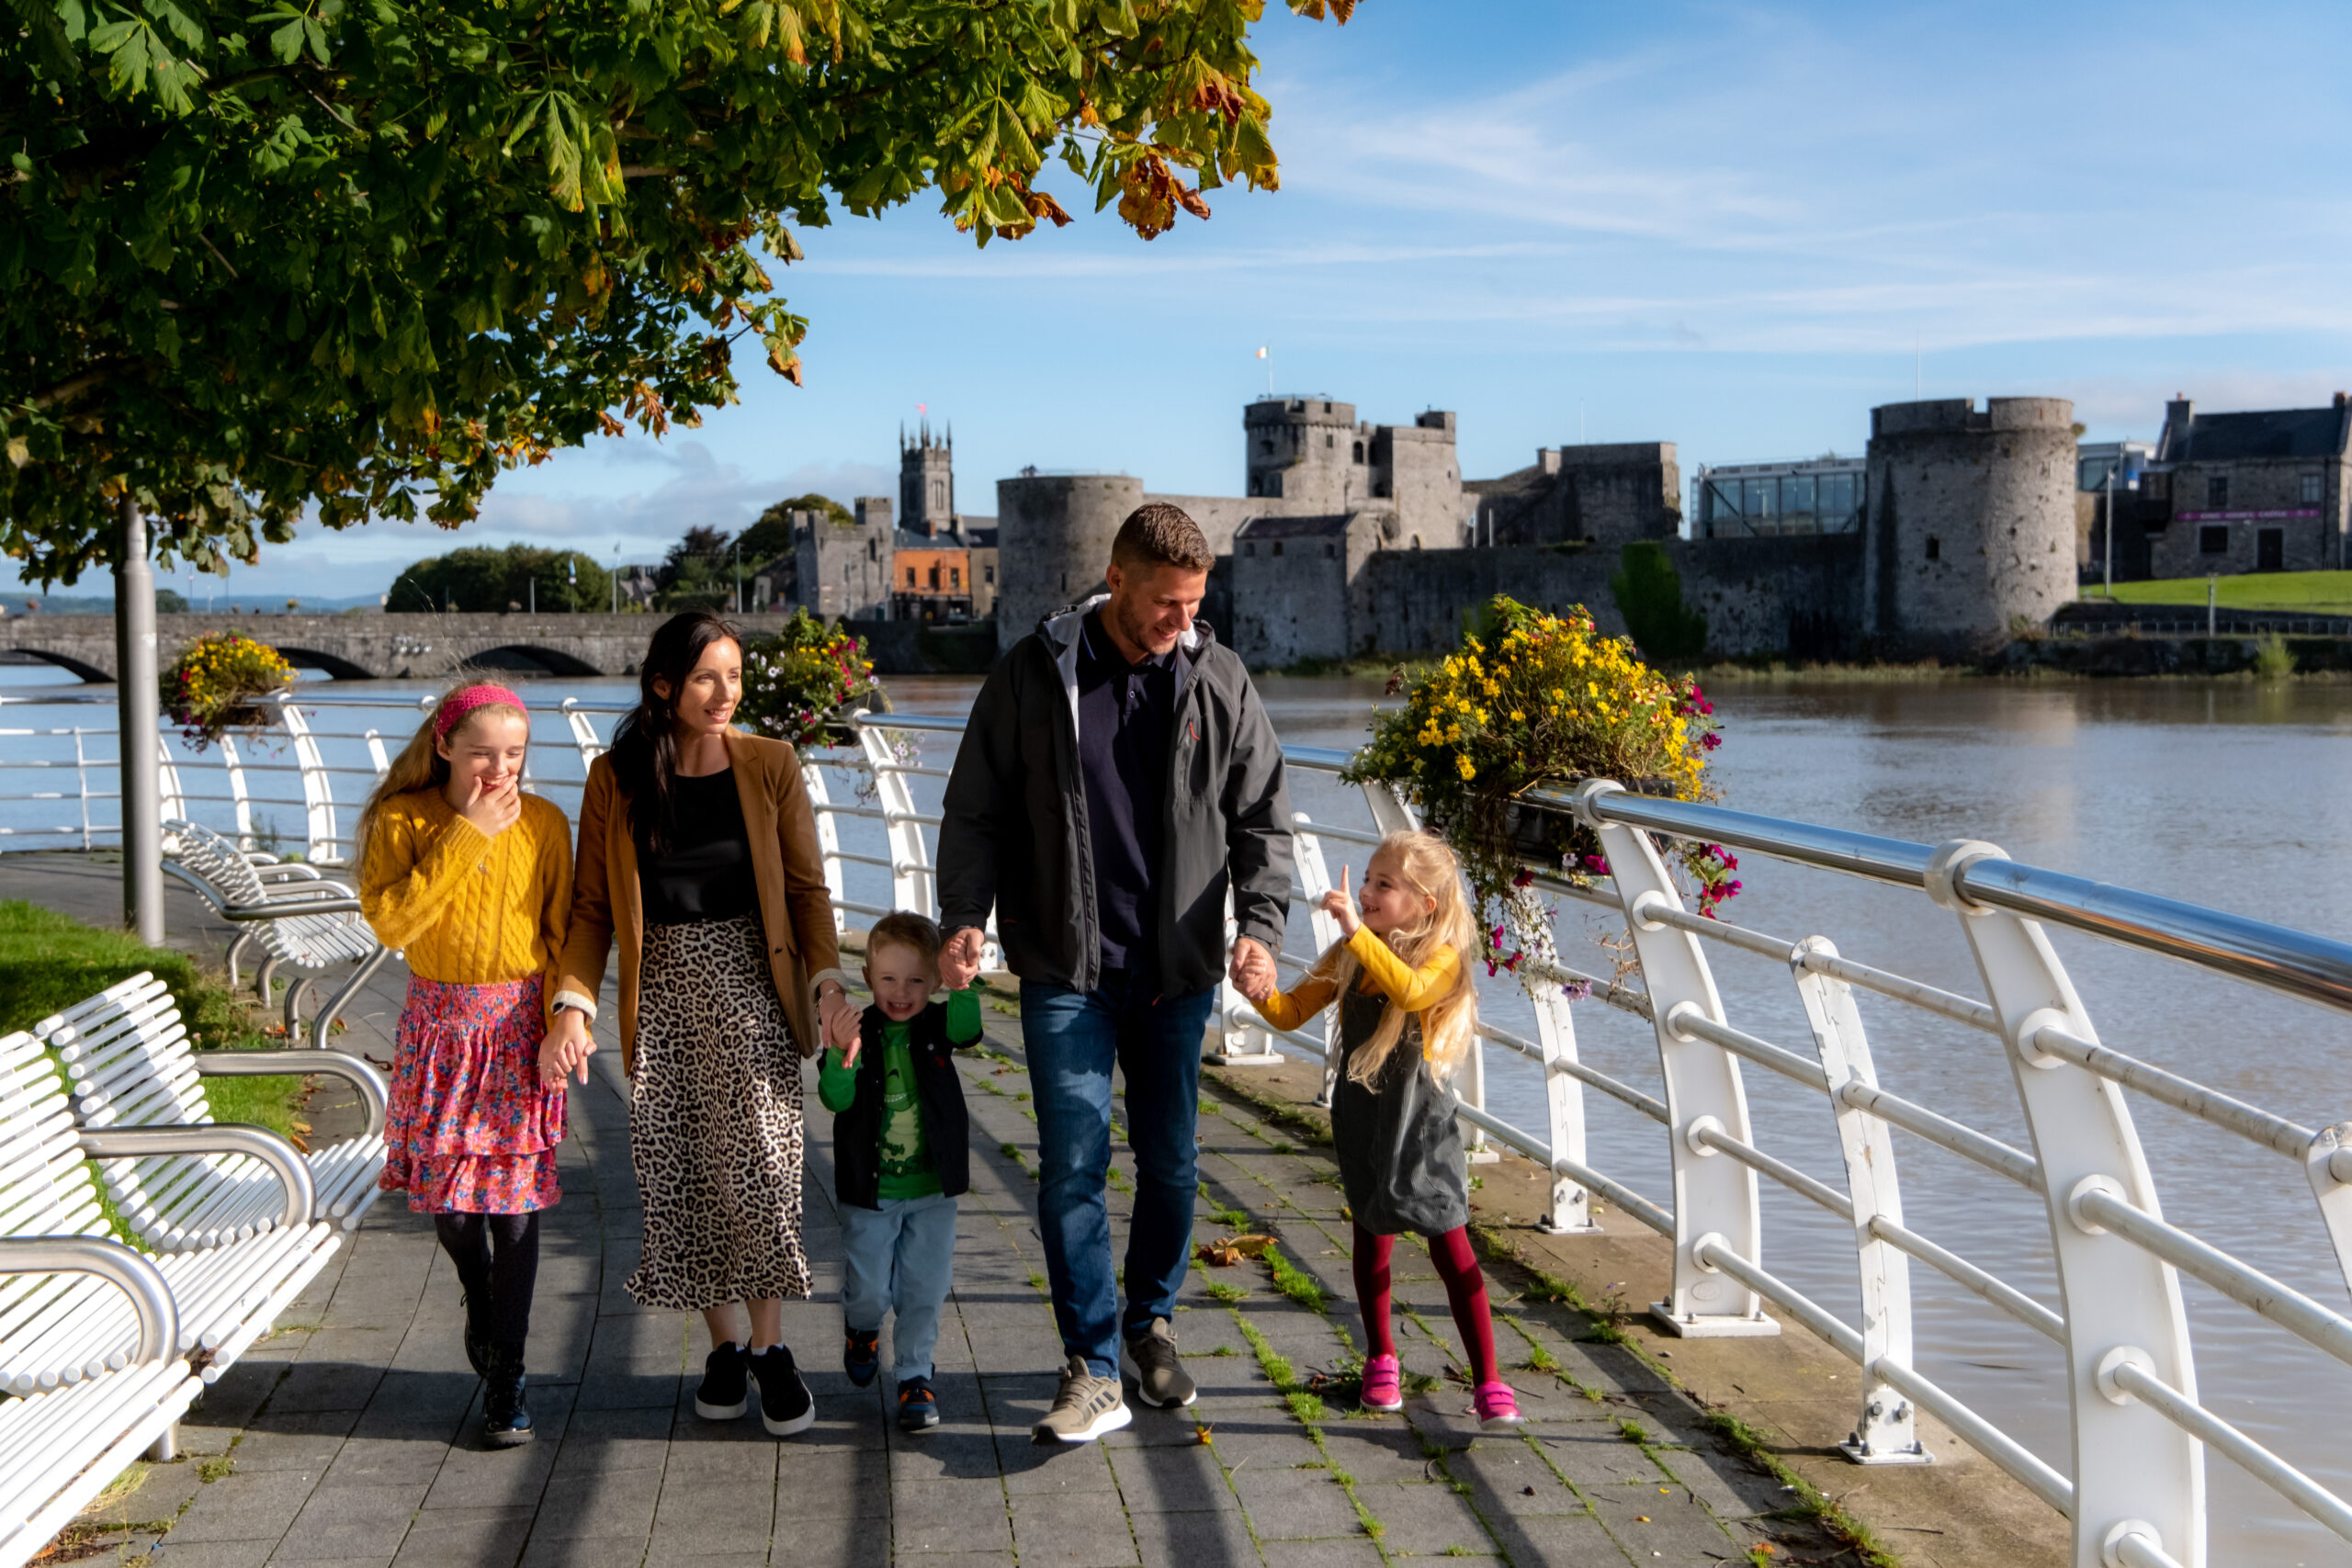 Limerick City and County Council launch 'Springtime in Limerick' promotional event encouraging people to enjoy "Springtime in Limerick"